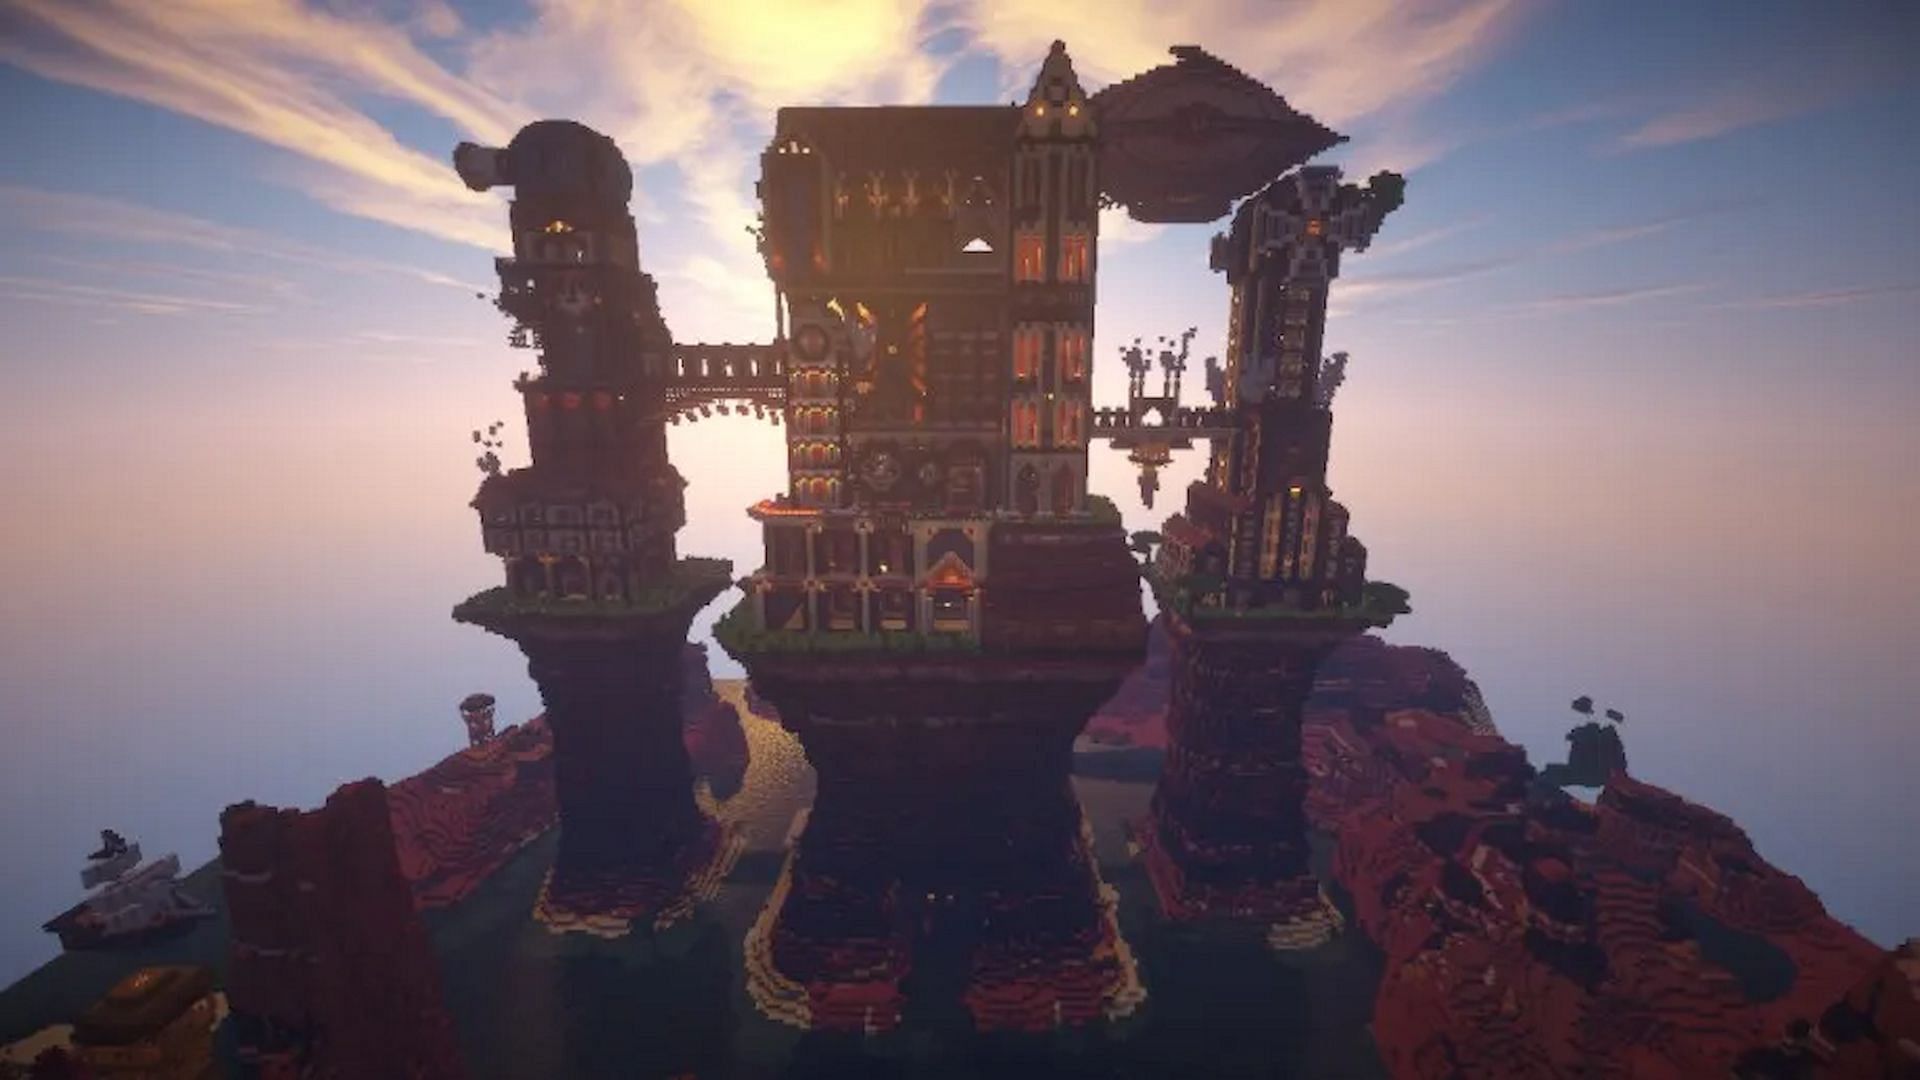 The Steampunk Castle is an entirely new twist on an incredibly complex castle build (Image via kgeri488 &amp; dimarson011)